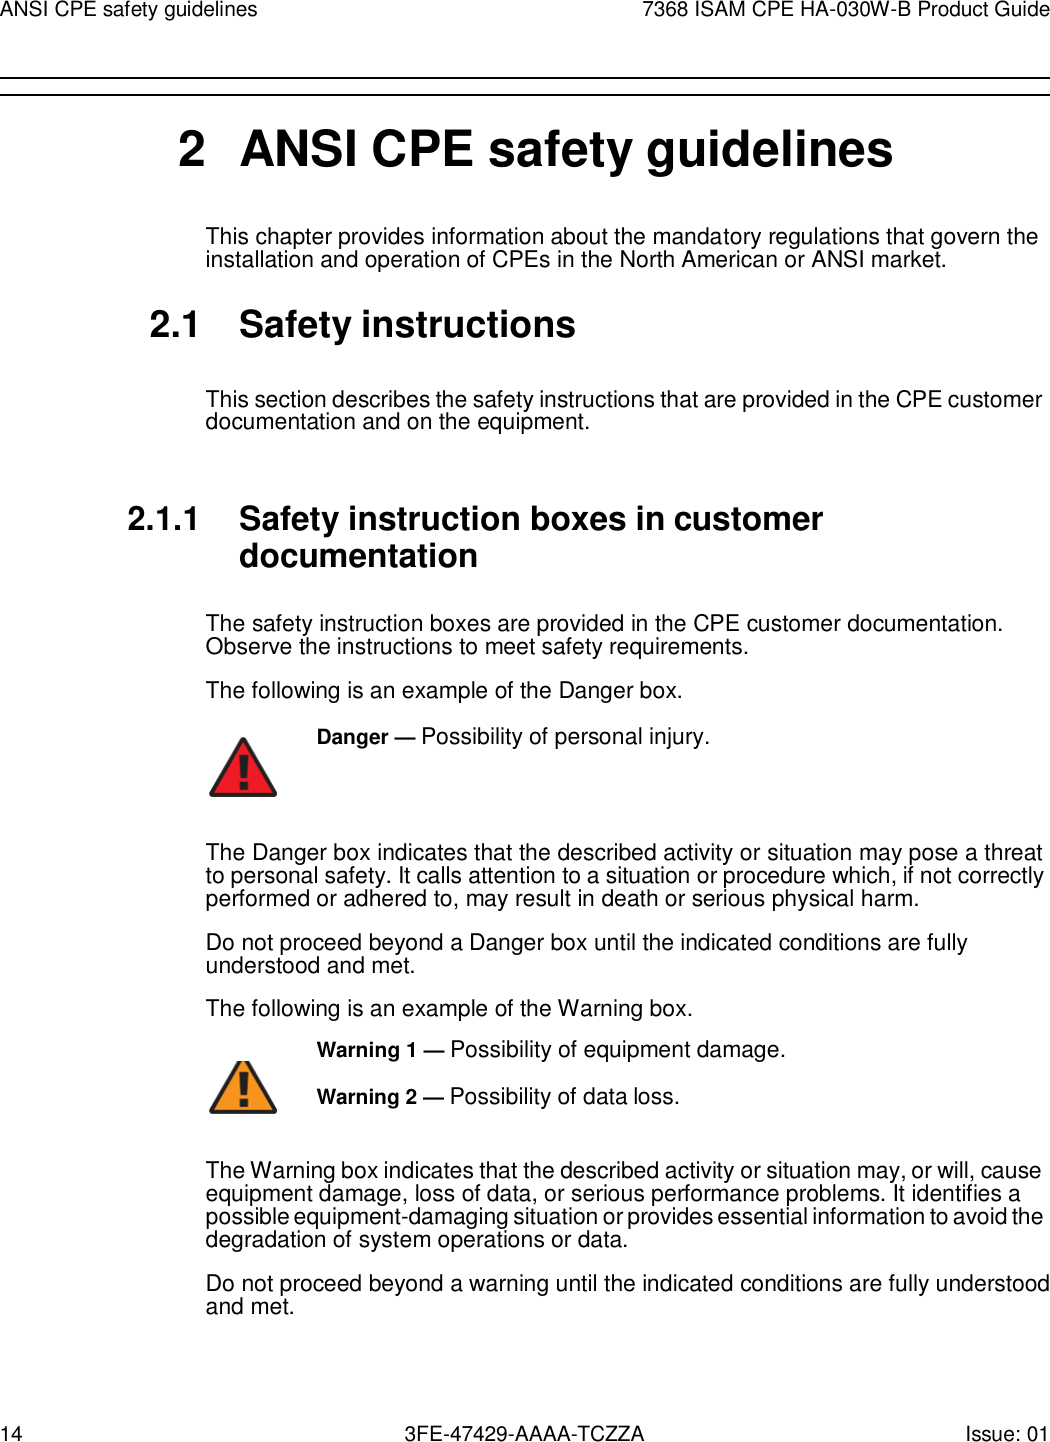 14 3FE-47429-AAAA-TCZZA Issue: 01 ANSI CPE safety guidelines 7368 ISAM CPE HA-030W-B Product Guide        2  ANSI CPE safety guidelines This chapter provides information about the mandatory regulations that govern the installation and operation of CPEs in the North American or ANSI market.  2.1  Safety instructions  This section describes the safety instructions that are provided in the CPE customer documentation and on the equipment.   2.1.1 Safety instruction boxes in customer documentation  The safety instruction boxes are provided in the CPE customer documentation. Observe the instructions to meet safety requirements. The following is an example of the Danger box. Danger — Possibility of personal injury.    The Danger box indicates that the described activity or situation may pose a threat to personal safety. It calls attention to a situation or procedure which, if not correctly performed or adhered to, may result in death or serious physical harm. Do not proceed beyond a Danger box until the indicated conditions are fully understood and met. The following is an example of the Warning box. Warning 1 — Possibility of equipment damage.         Warning 2 — Possibility of data loss. The Warning box indicates that the described activity or situation may, or will, cause equipment damage, loss of data, or serious performance problems. It identifies a possible equipment-damaging situation or provides essential information to avoid the degradation of system operations or data. Do not proceed beyond a warning until the indicated conditions are fully understood and met. 